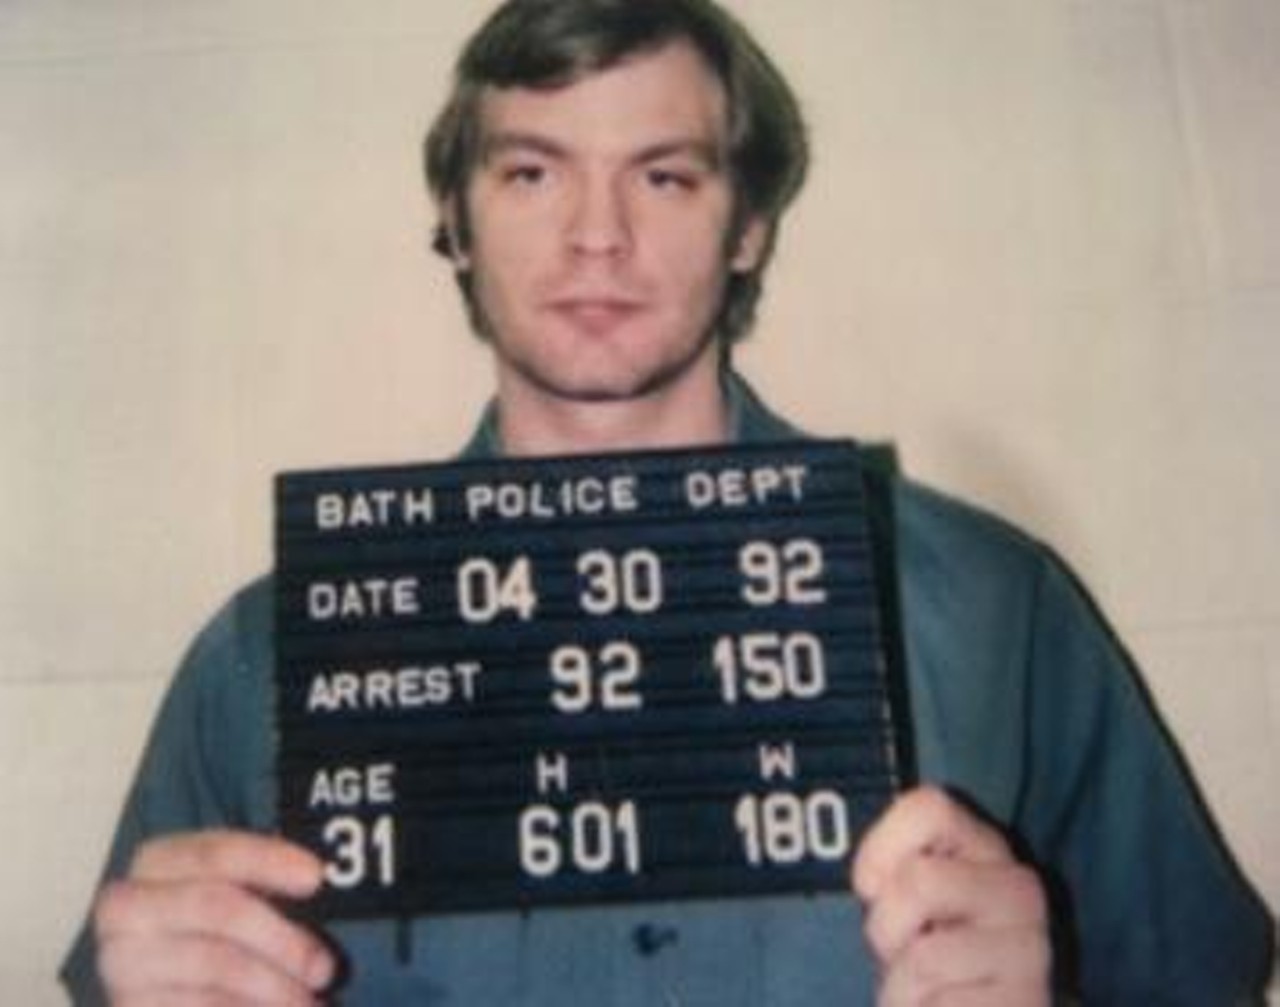  Jeffrey Dahmer&#146;s Murders
Yes, Dahmer, one of the more infamous killers in United States, was known mostly for his crimes in Milwaukee, but his Northeast Ohio ties often cause locals to remember this heinous man. Dahmer, who raped, murdered and dismembered at least 17 boys and men lived in Bath for a time and attended high school outside of Akron at Revere High School. He also committed at least one of his murders in Ohio. 
Photo via Wikimedia Commons